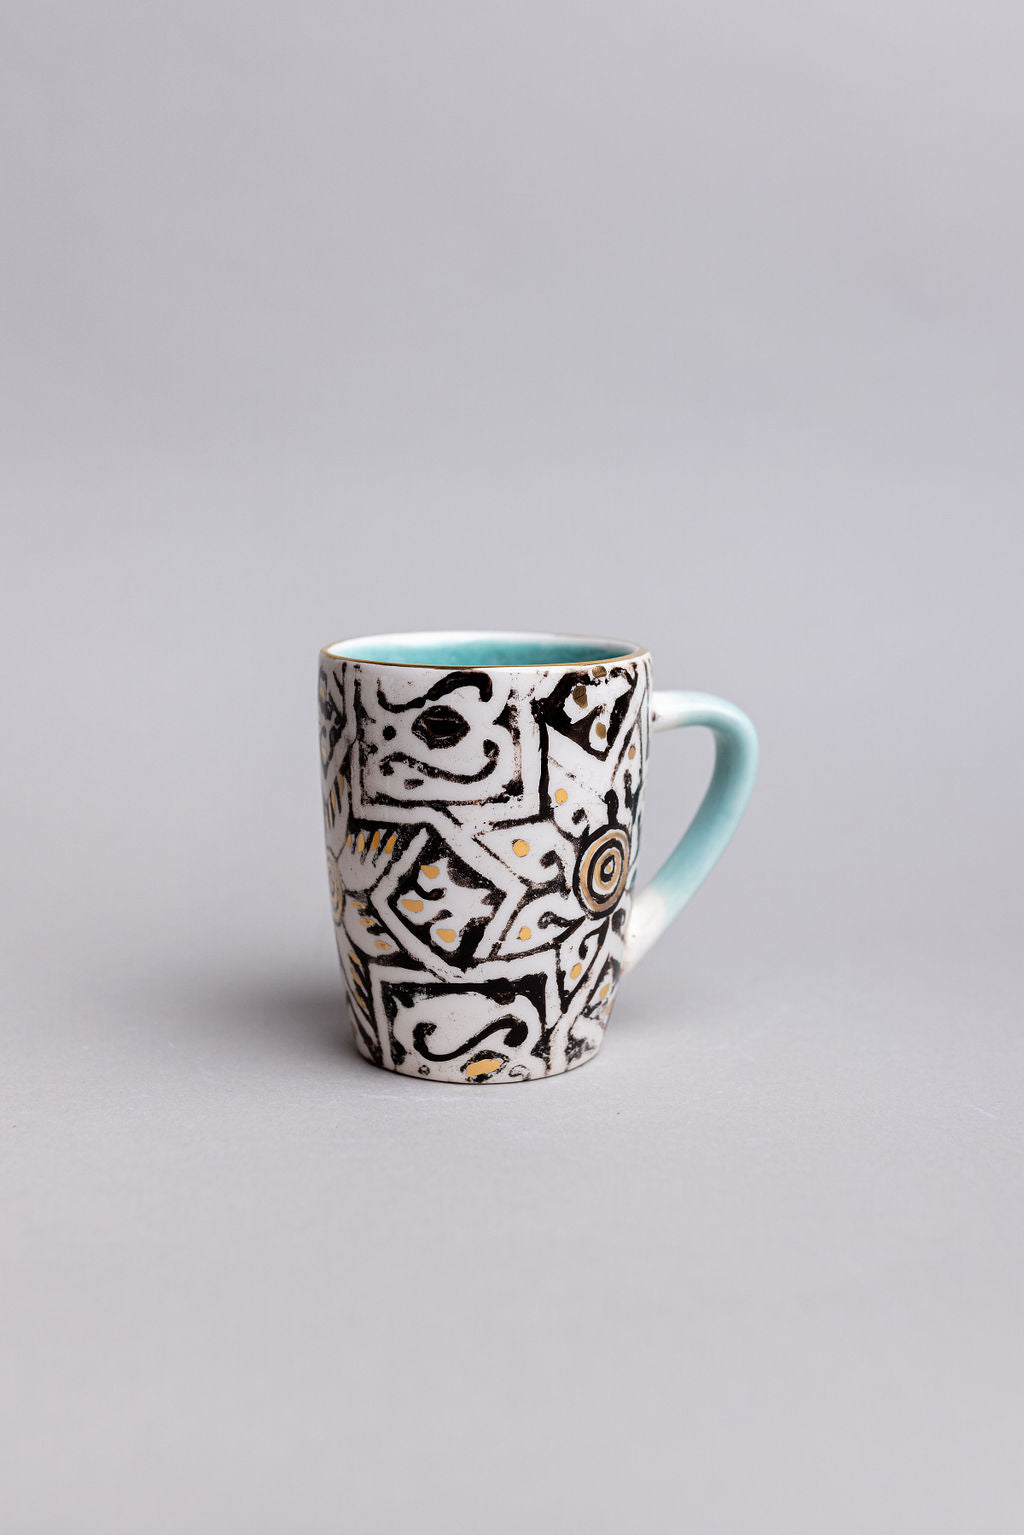 White And Turquoise Ceramic Mugs | Hand Made Black And Gold Pattern